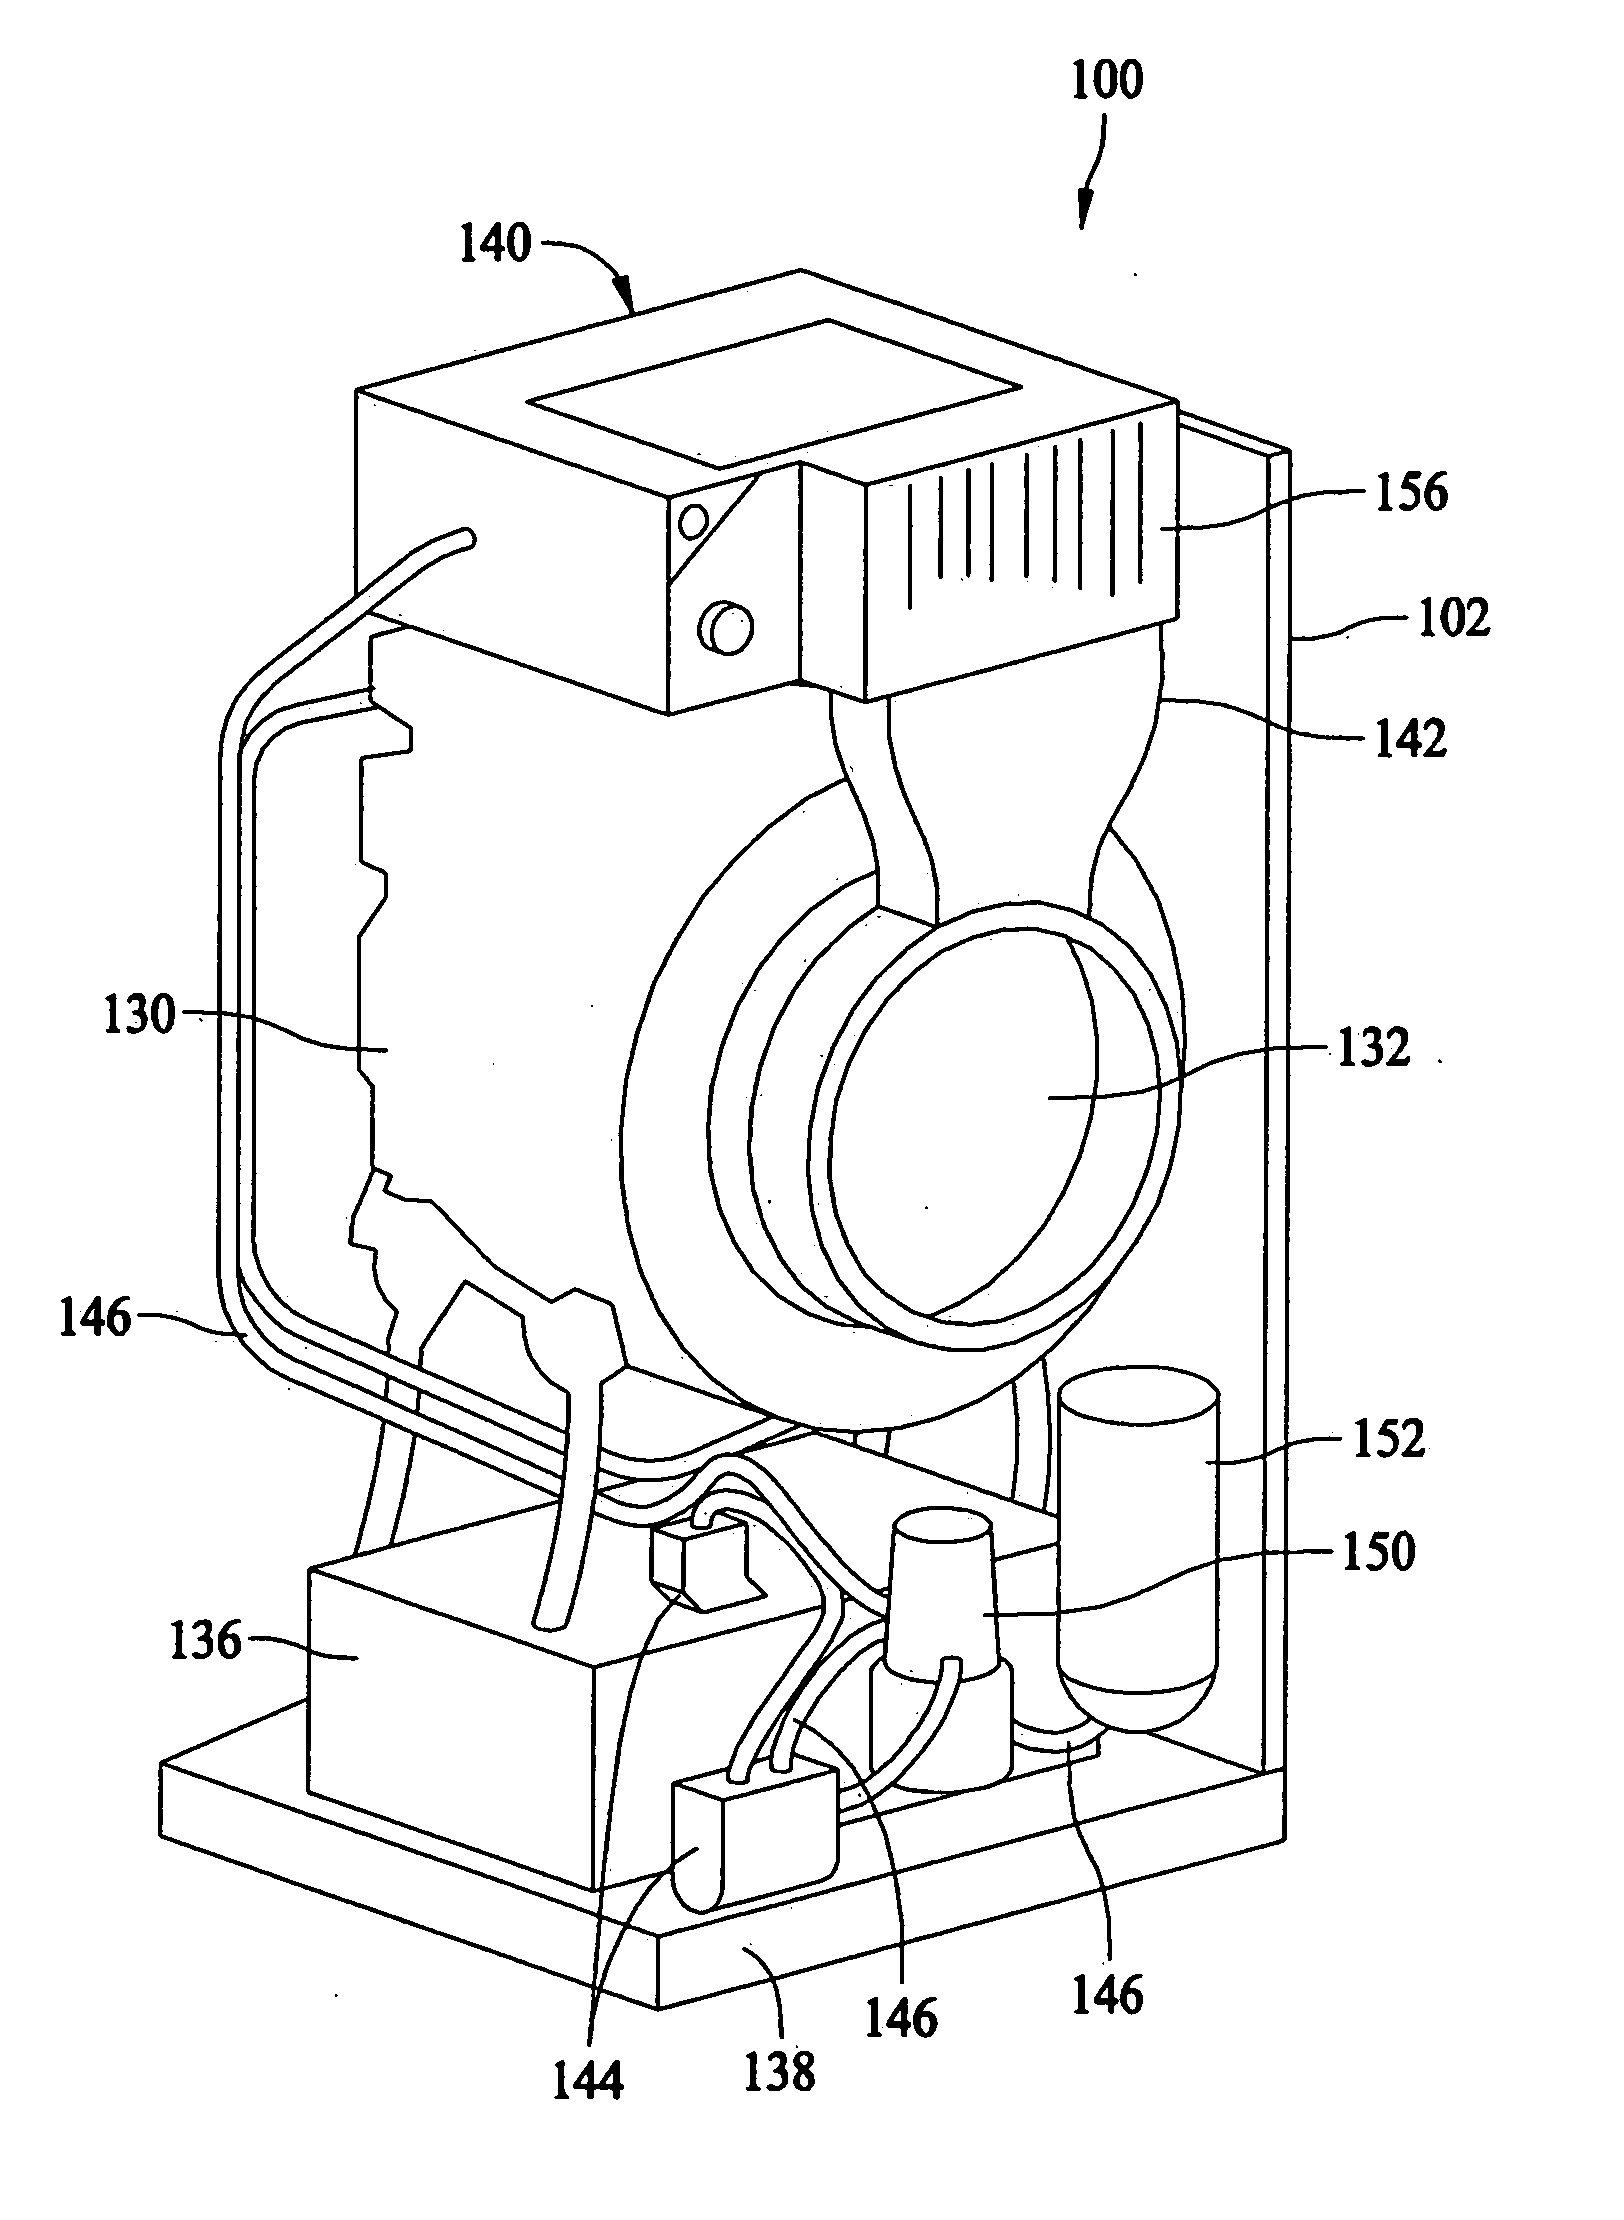 Methods and systems for detecting dryness of clothes in an appliance